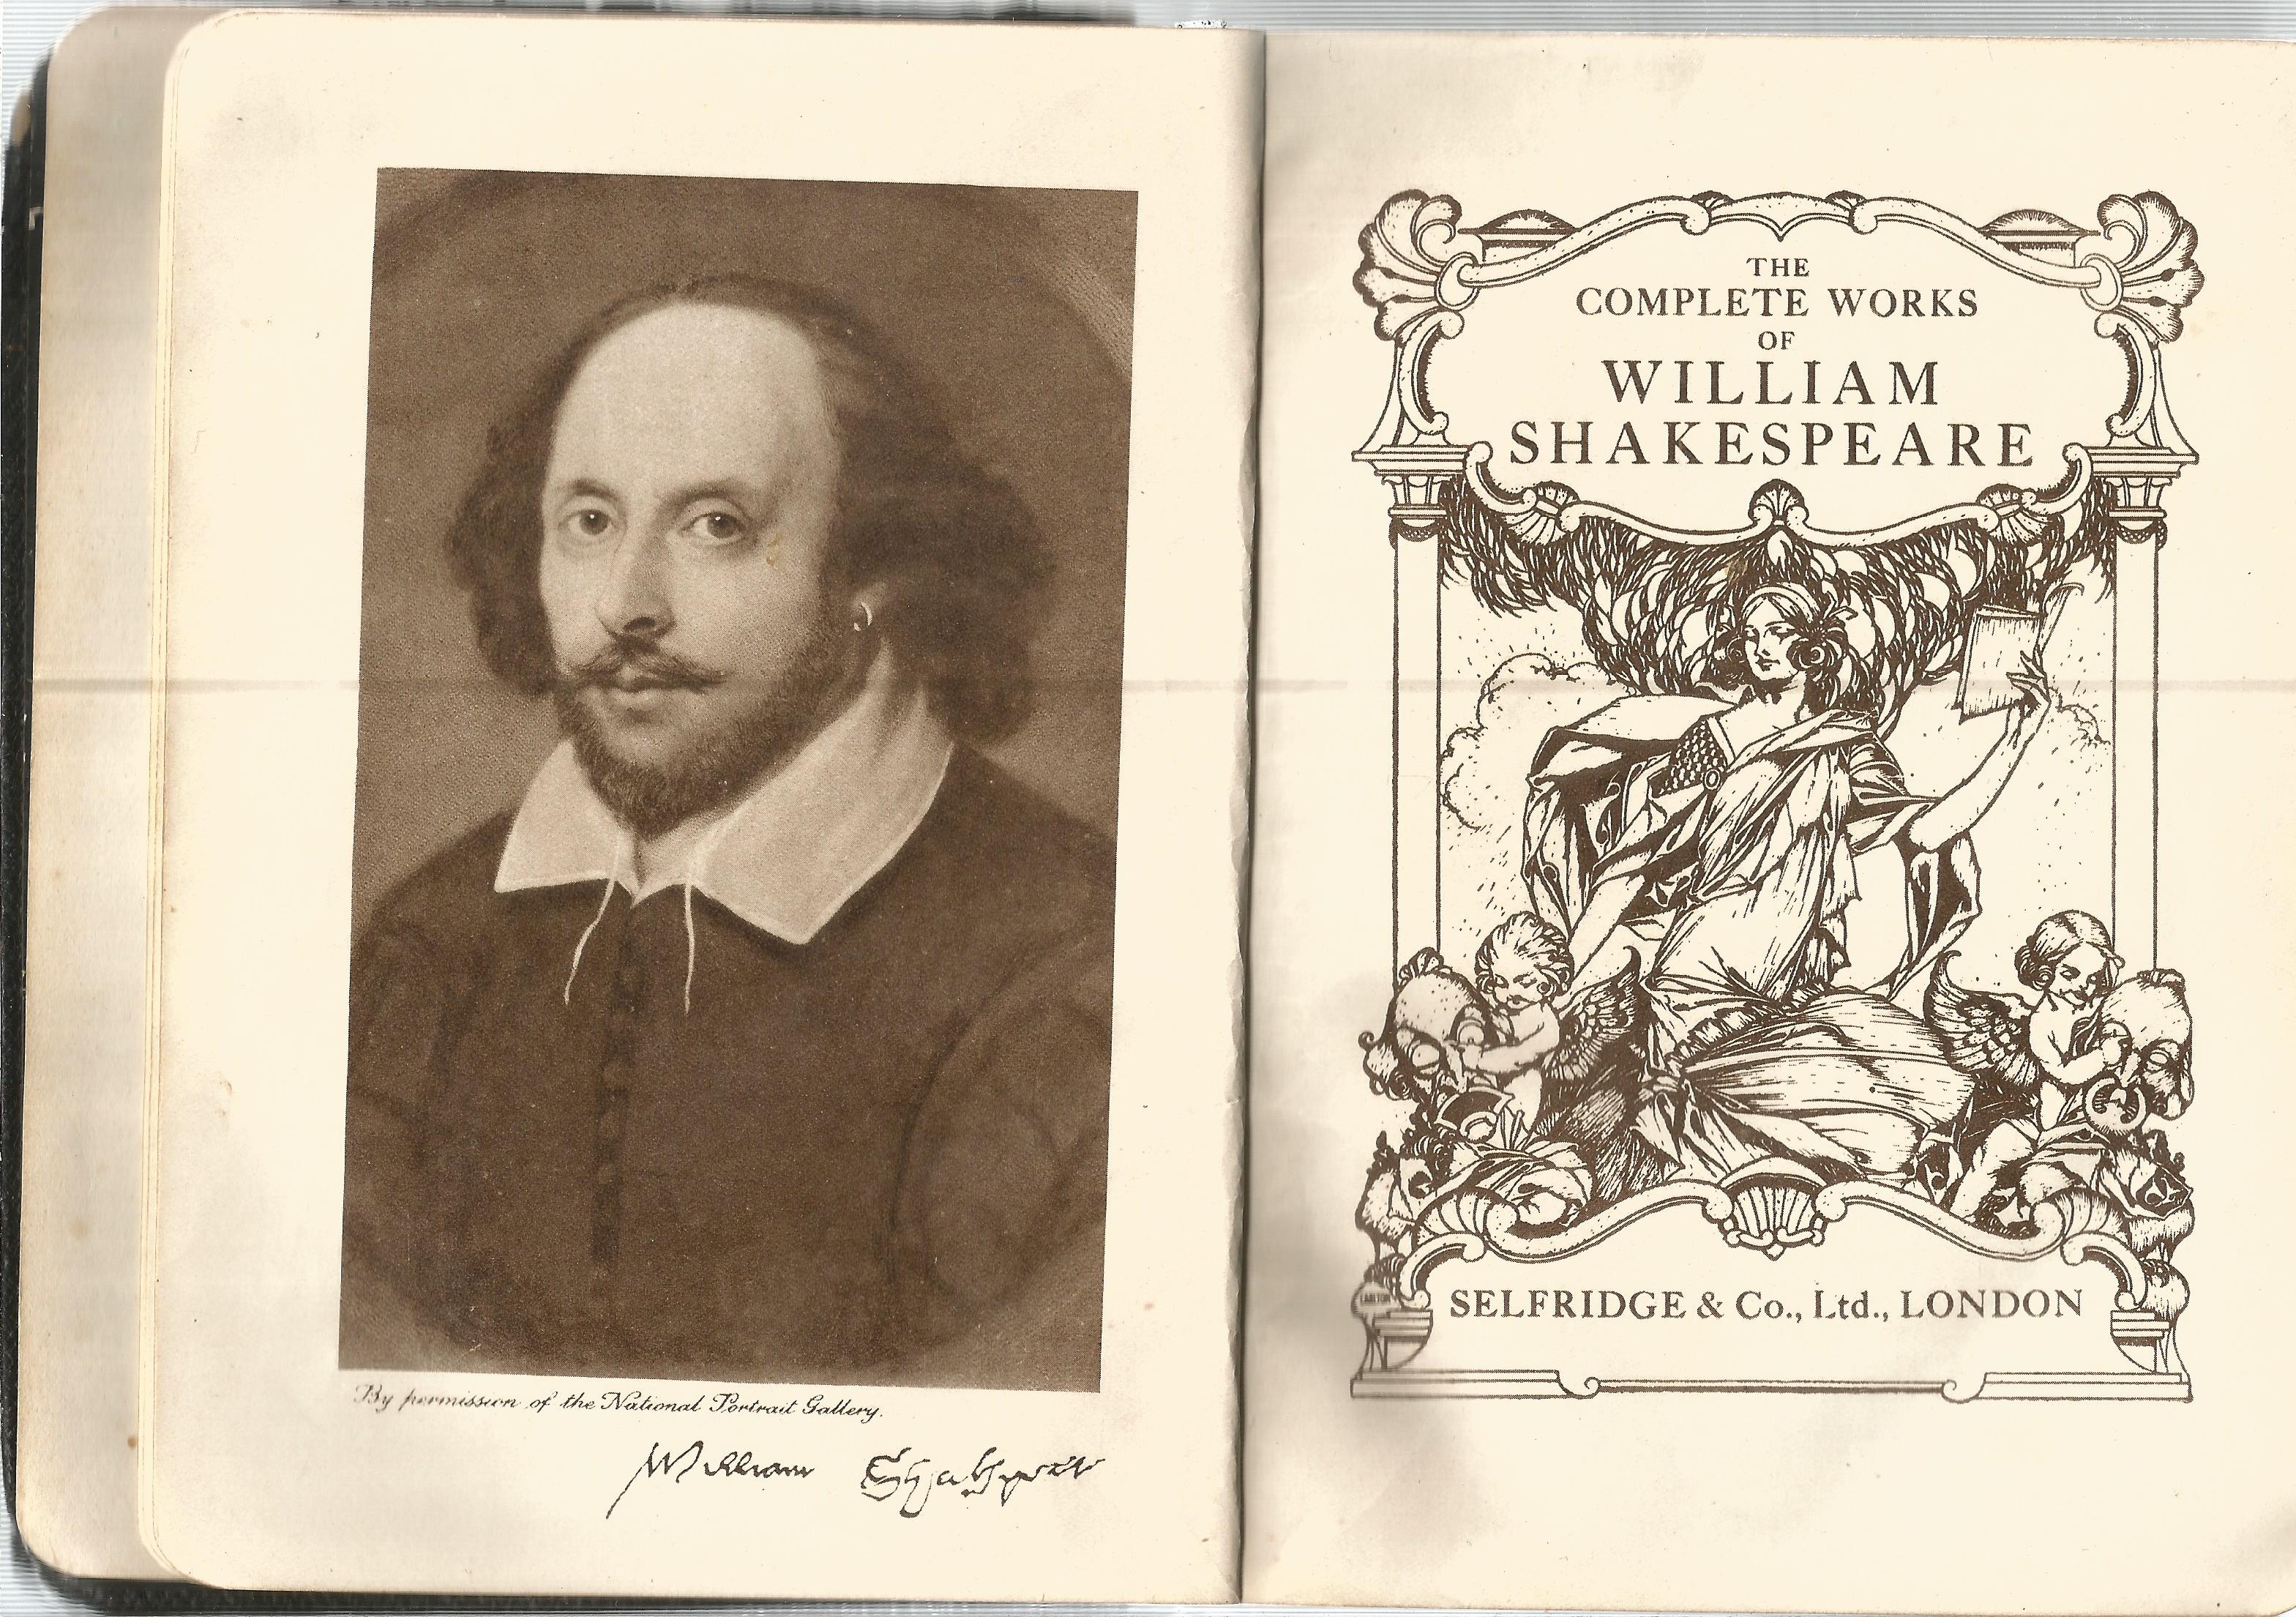 The Complete Works of William Shakespeare. Unsigned hardback book with no dust jacket published in - Image 3 of 3